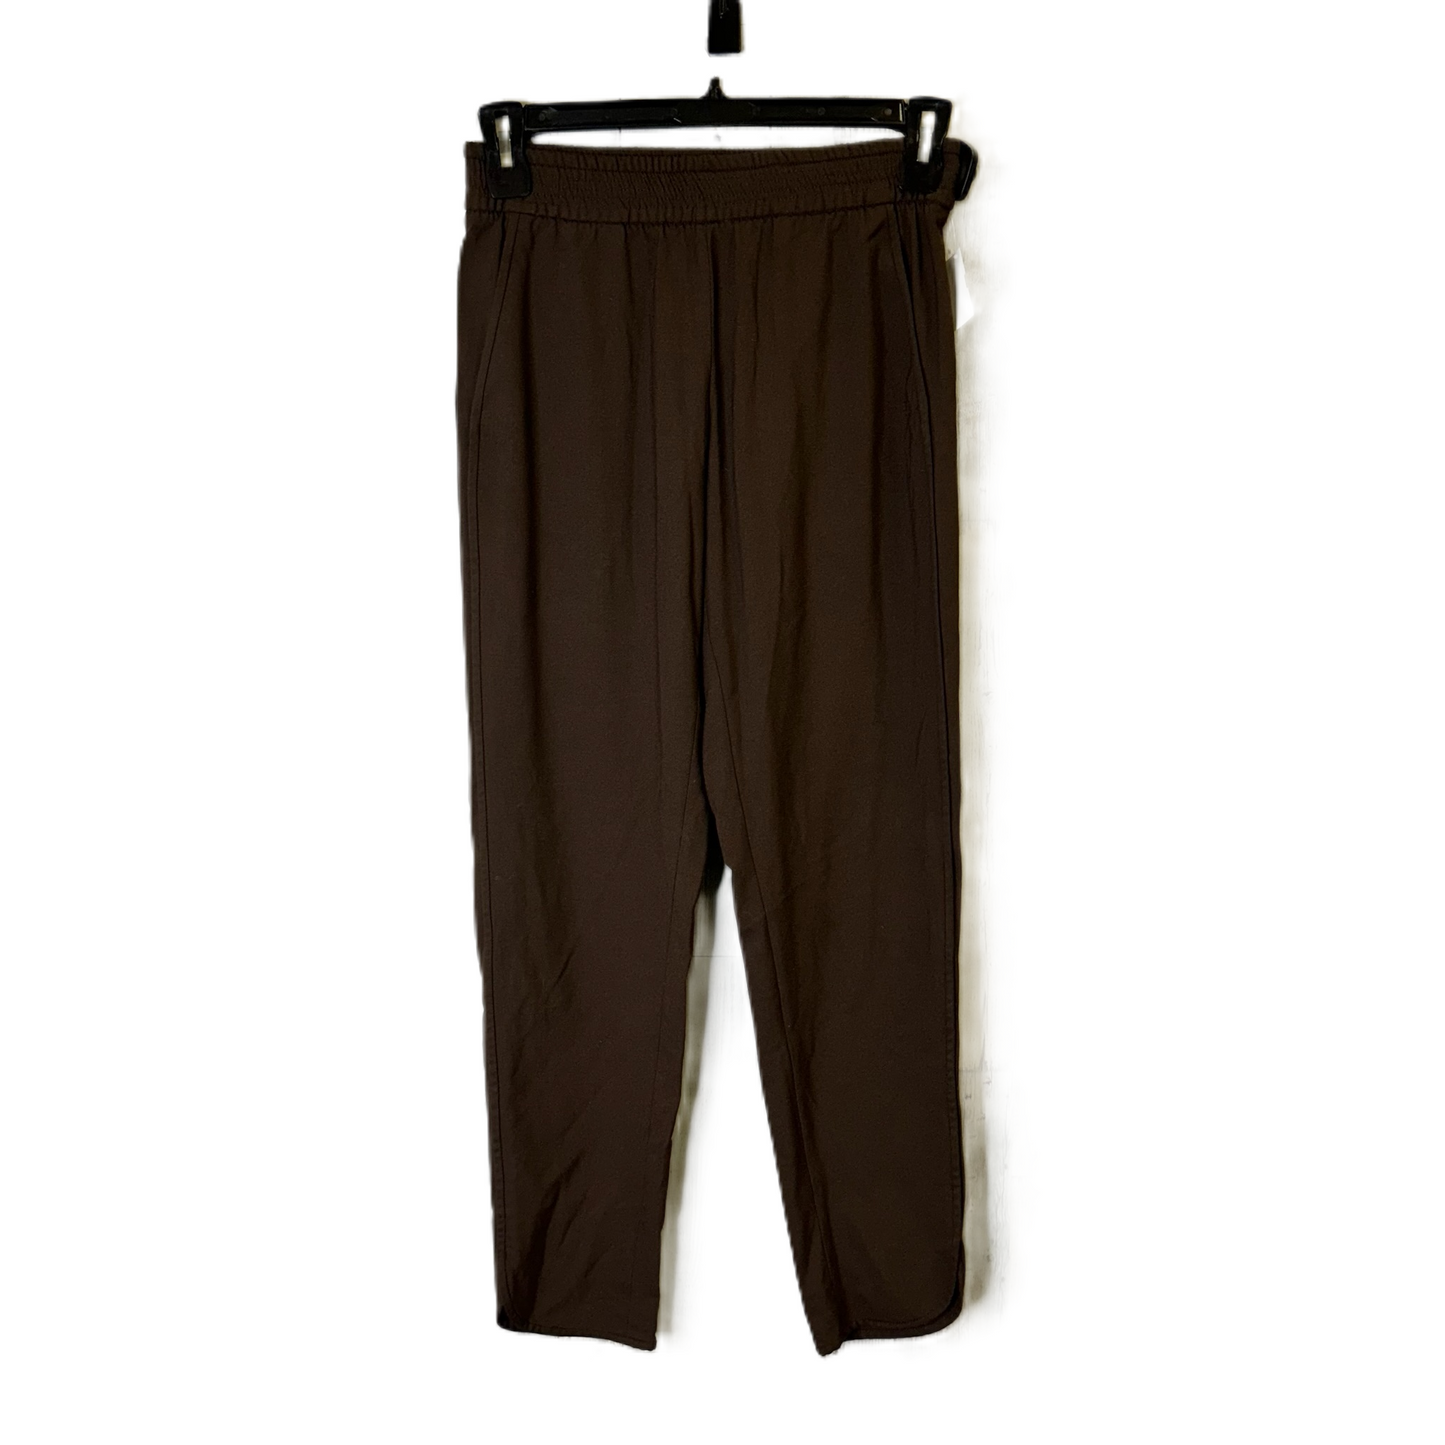 Brown Pants Other By Zara, Size: Xs